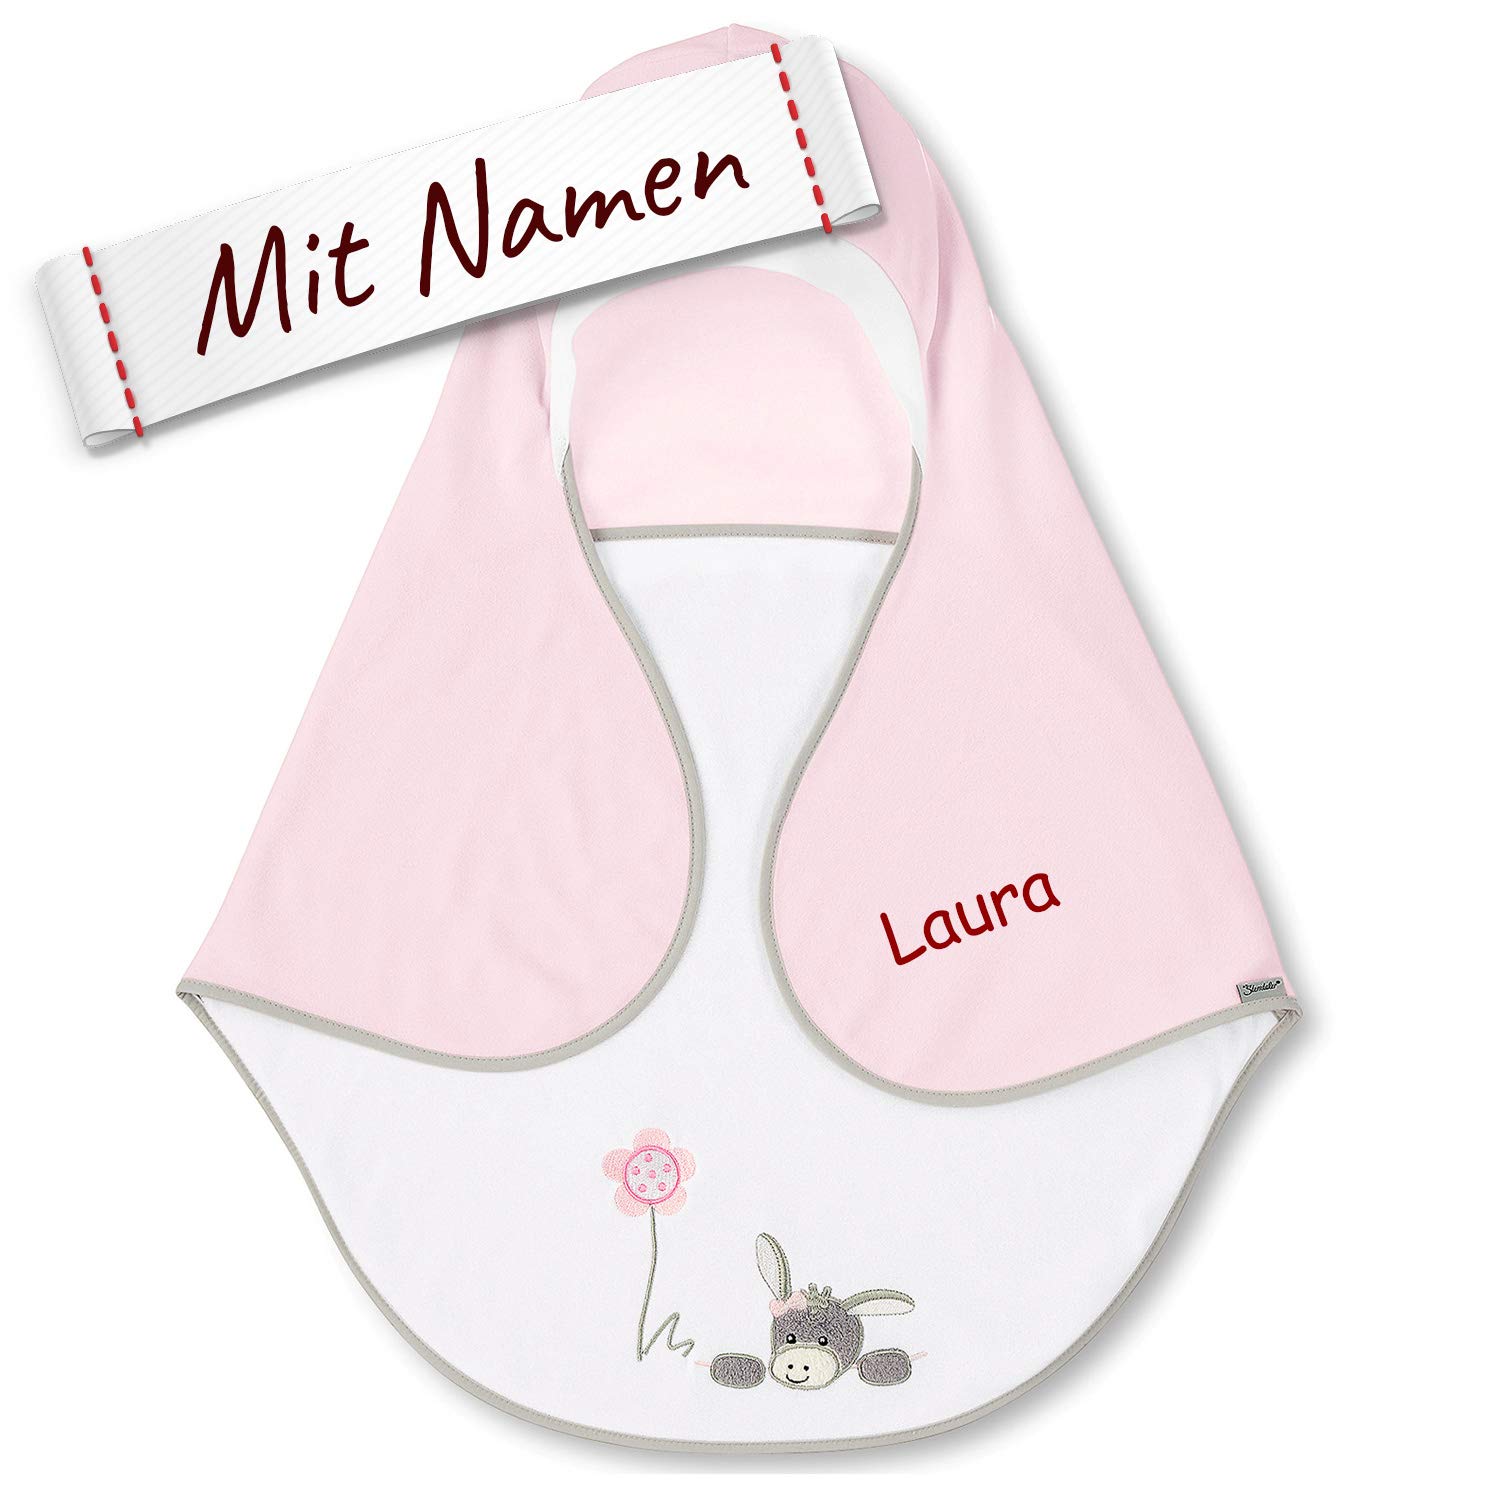 Sterntaler Baby Swaddling Blanket with Name, Universal for Baby Seat, Car Seat, e.g. for Maxi-Cosi, Cybex, Kiddy, Römer, for Pram, Buggy or Baby Cot Emmi Girl White/Pink